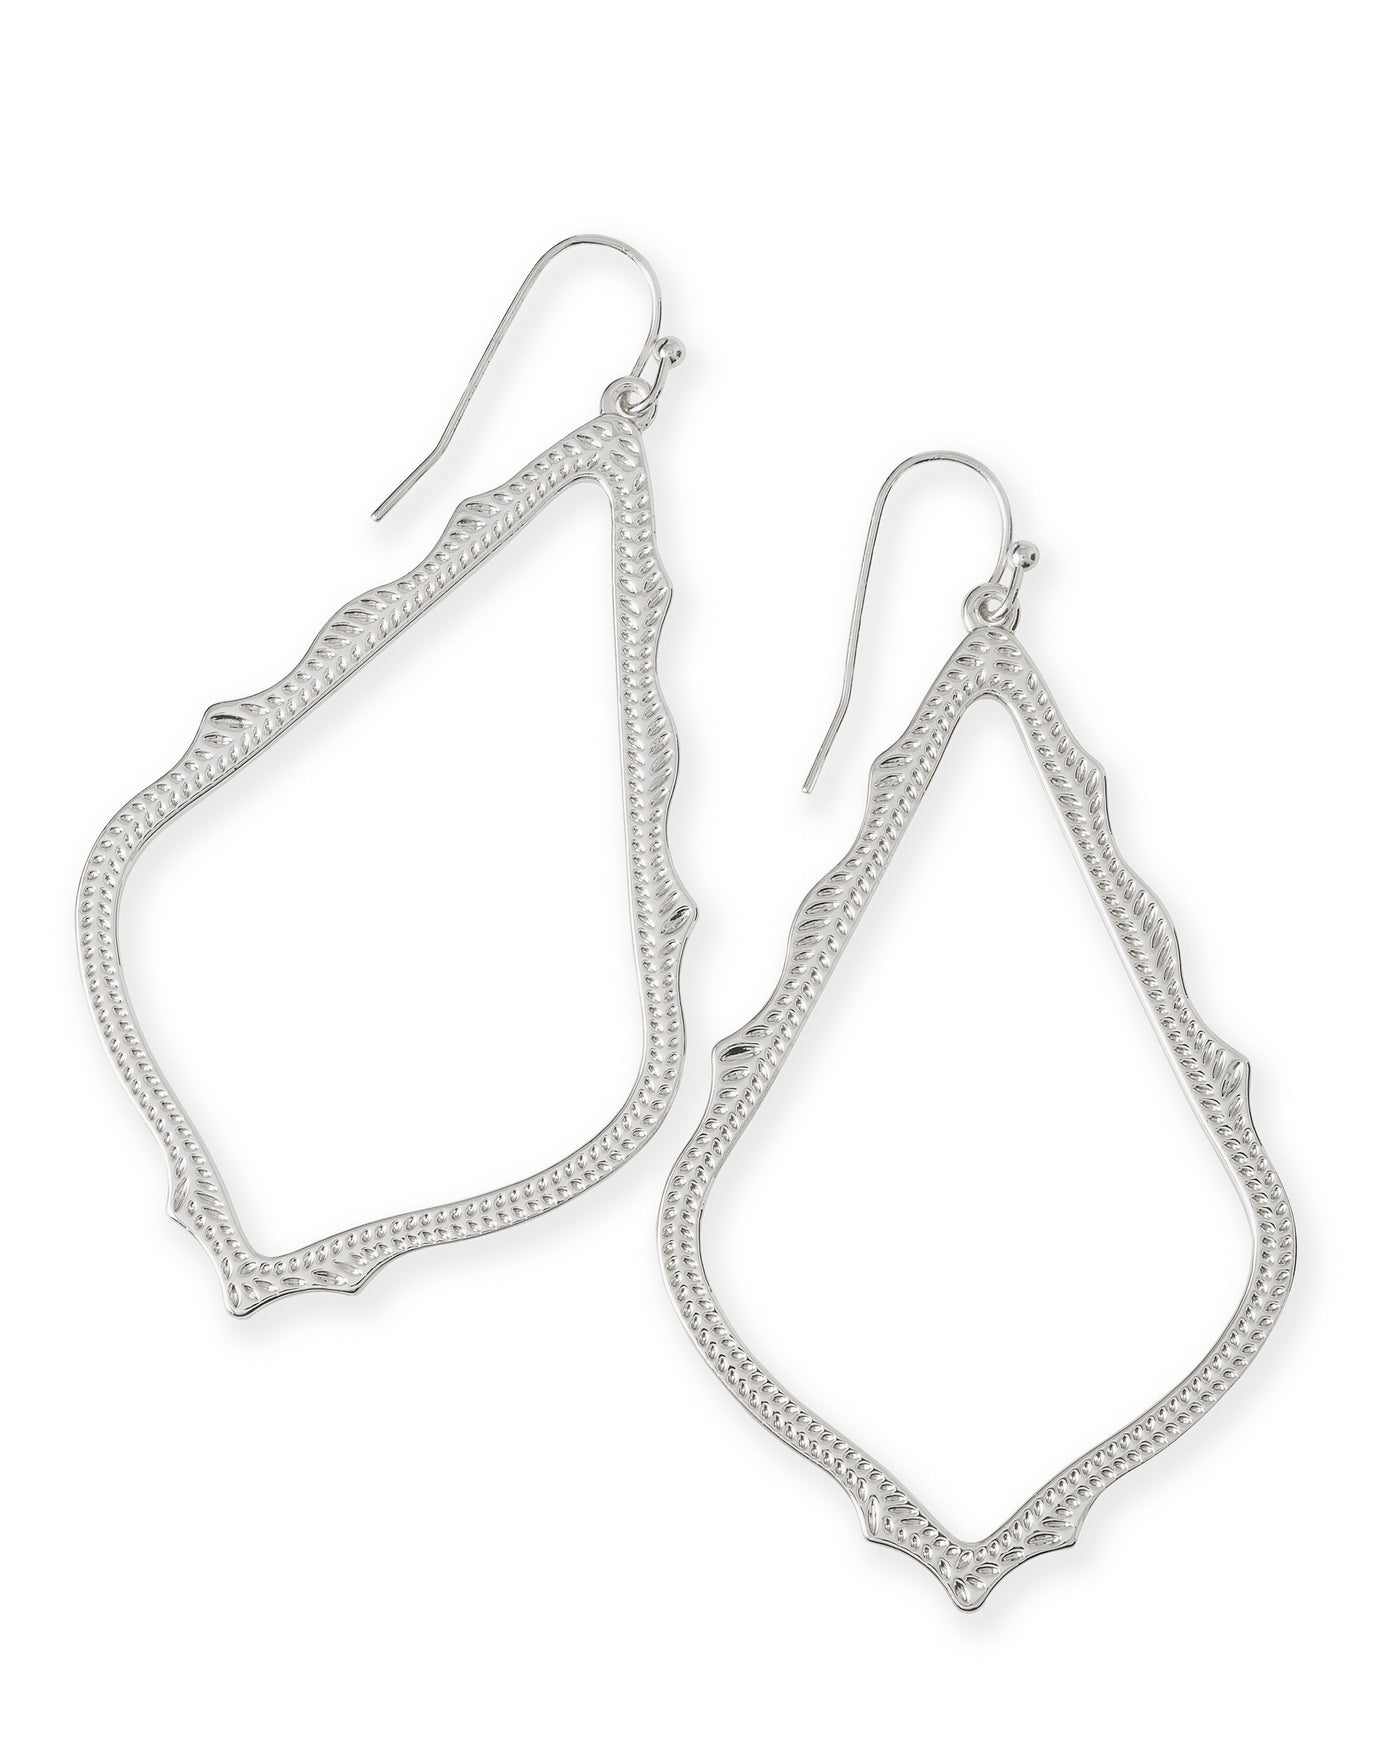 Kendra Scott Sophee Earrings in Silver-Earrings-Kendra Scott-Market Street Nest, Fashionable Clothing, Shoes and Home Décor Located in Mabank, TX